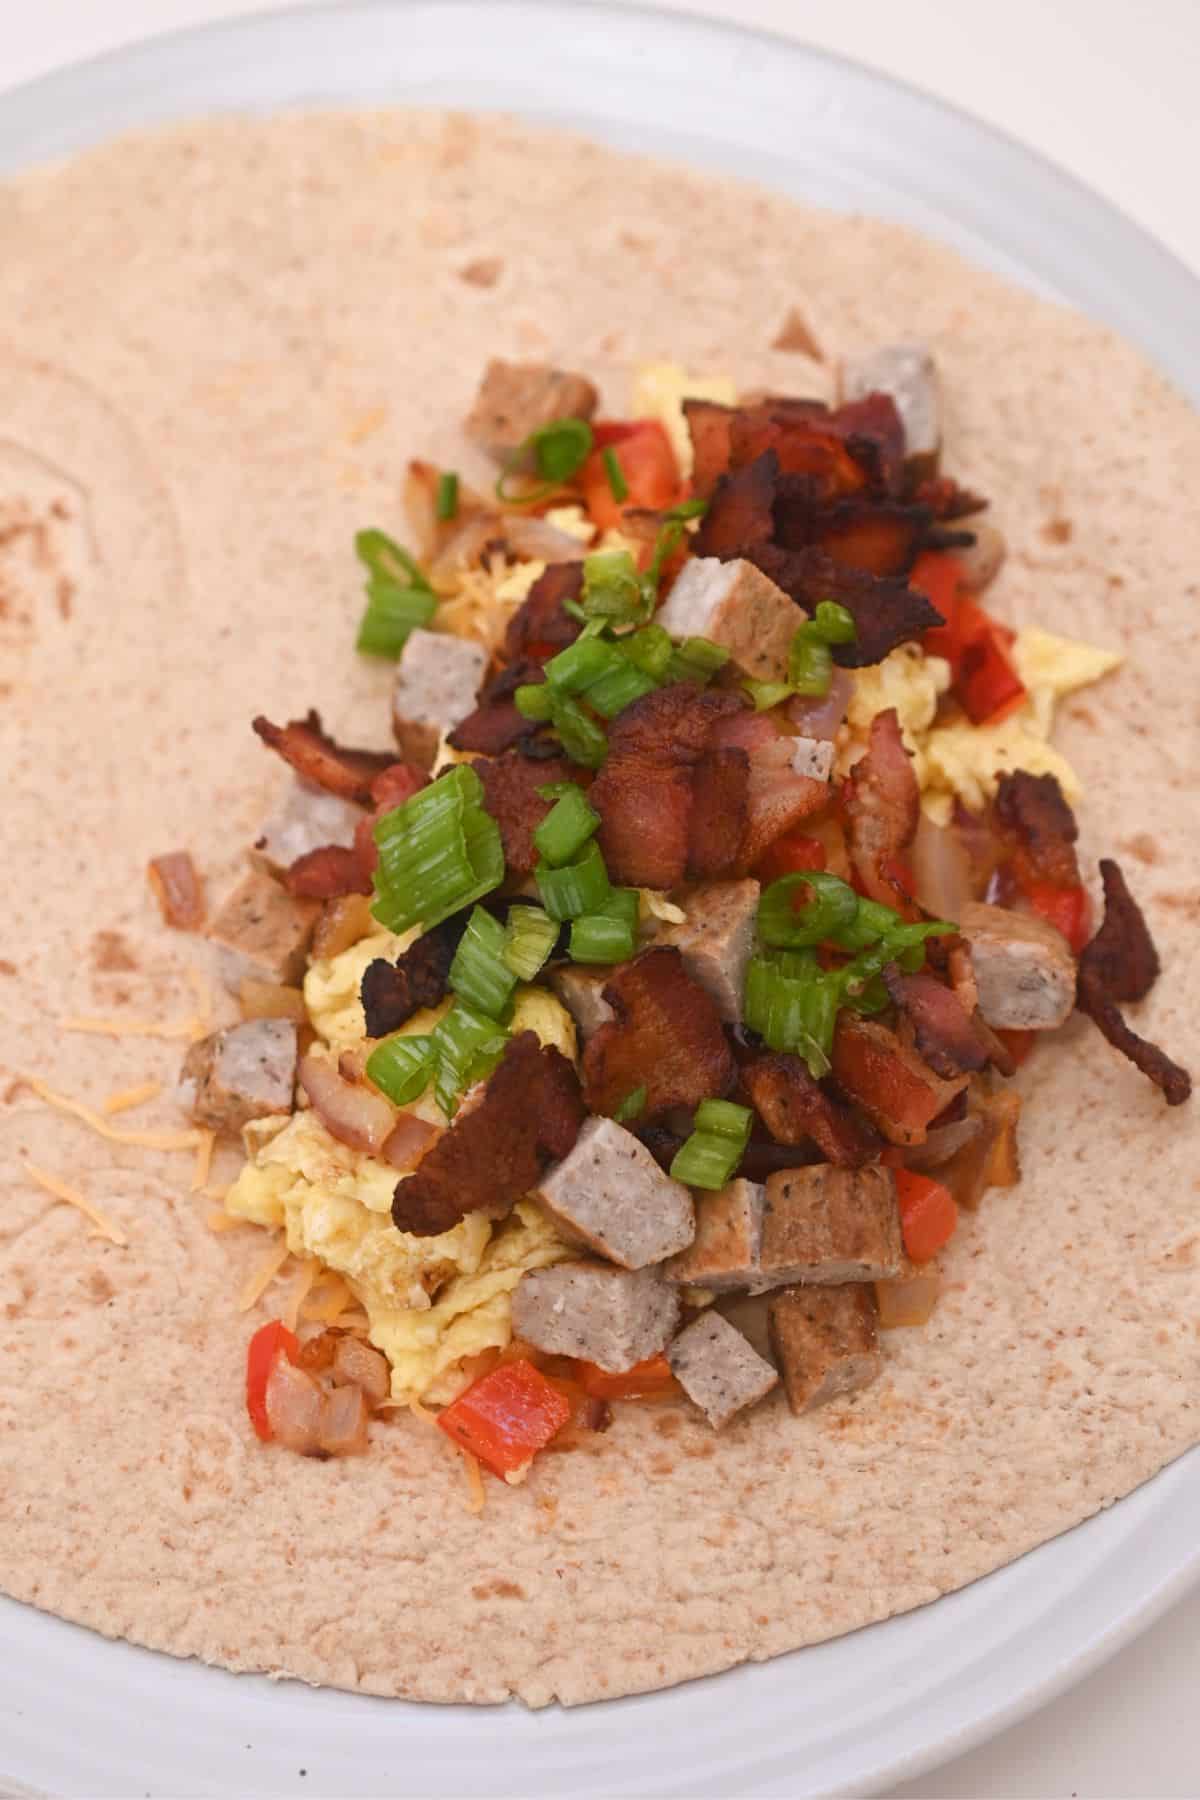 cheese, eggs, vegetables, sausage, bacon and green onions in tortilla